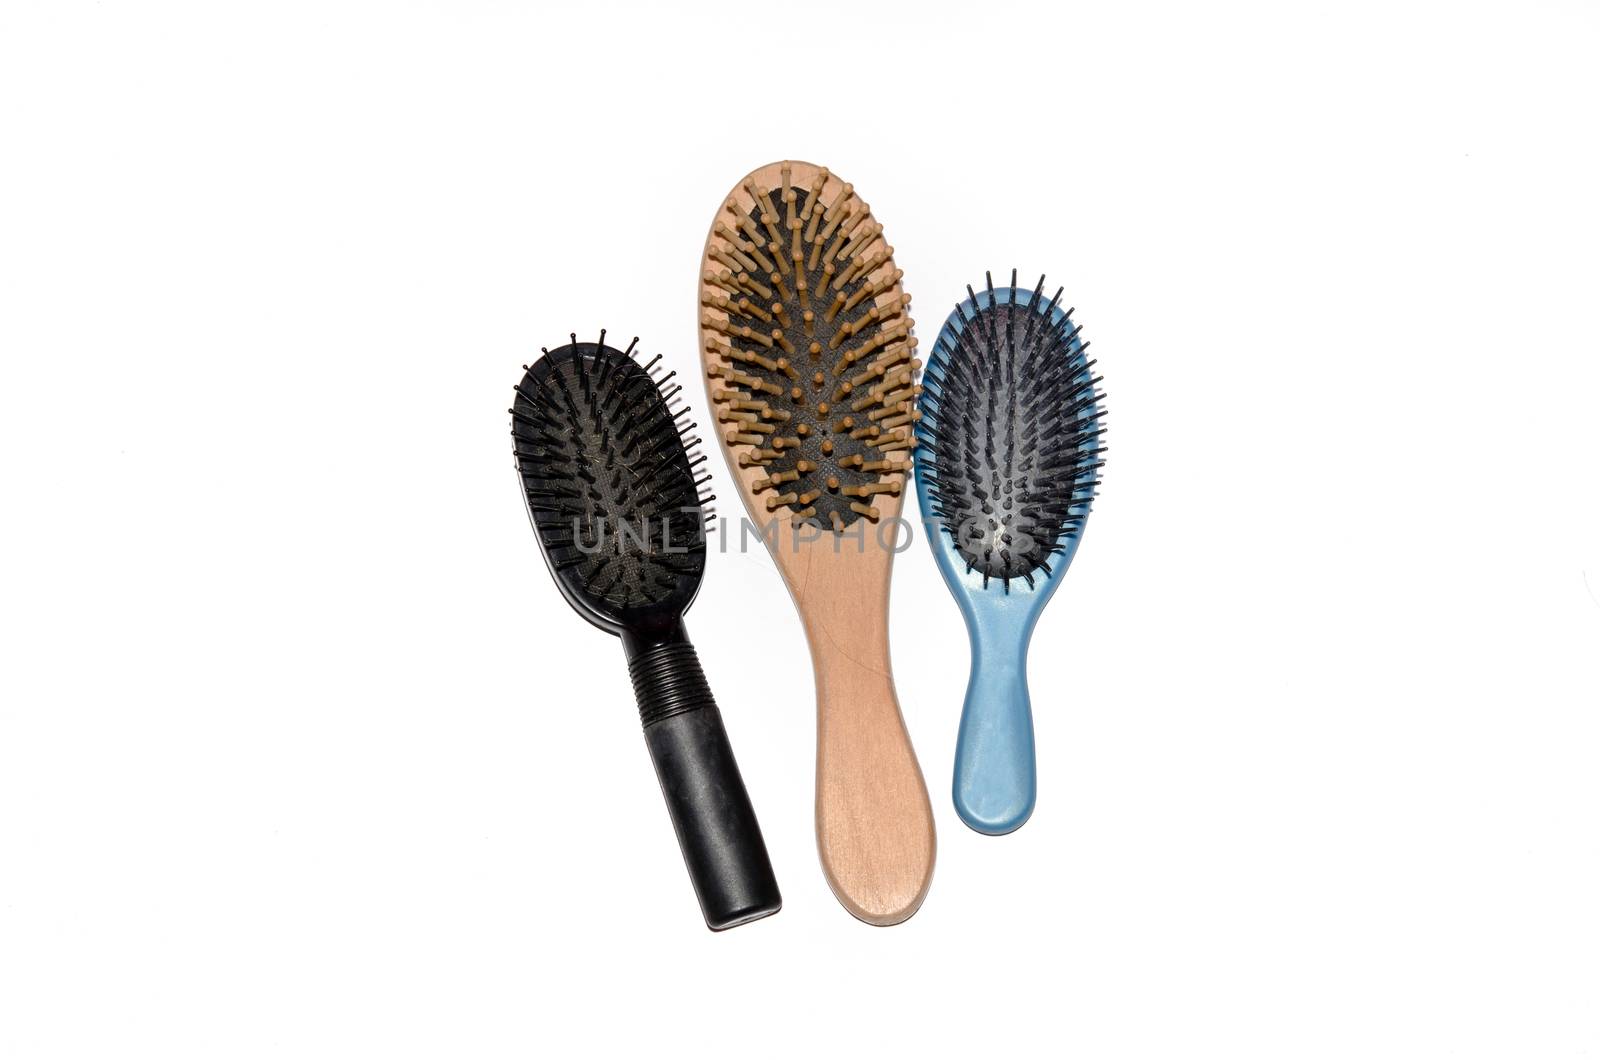 The comb brush isolated from white background.